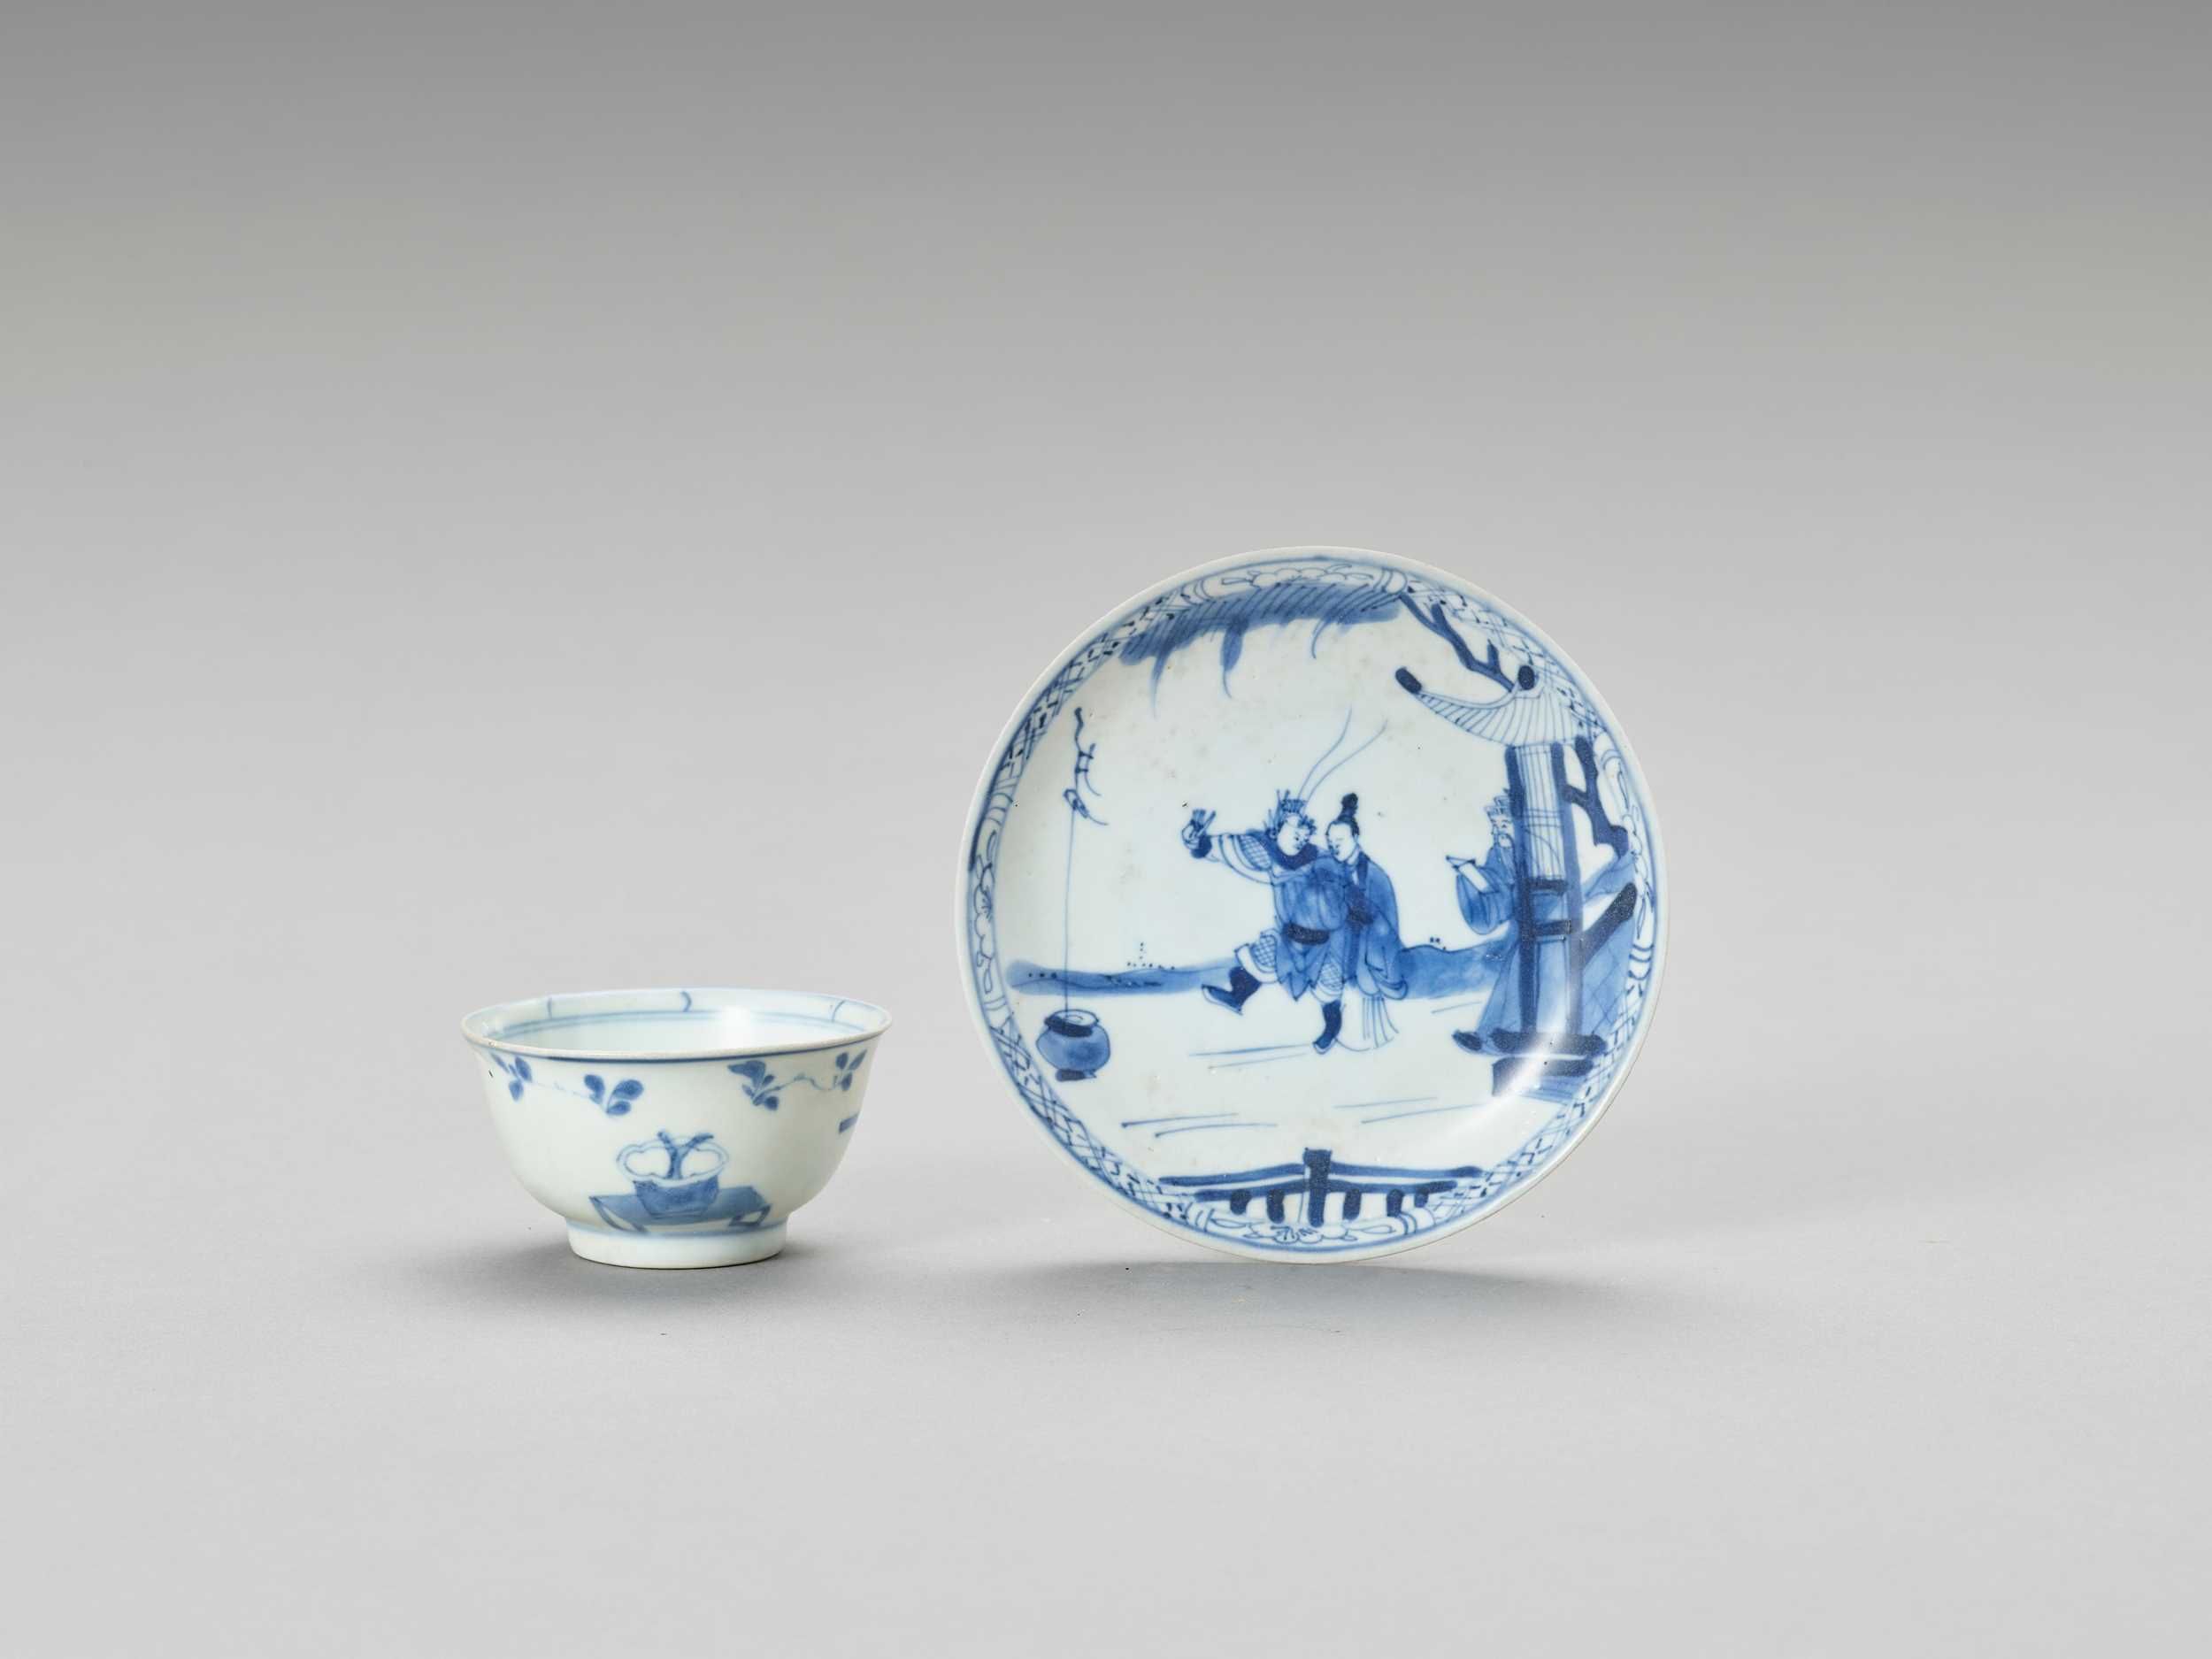 Lot 627 - A BLUE AND WHITE PORCELAIN CUP AND SAUCER, MING